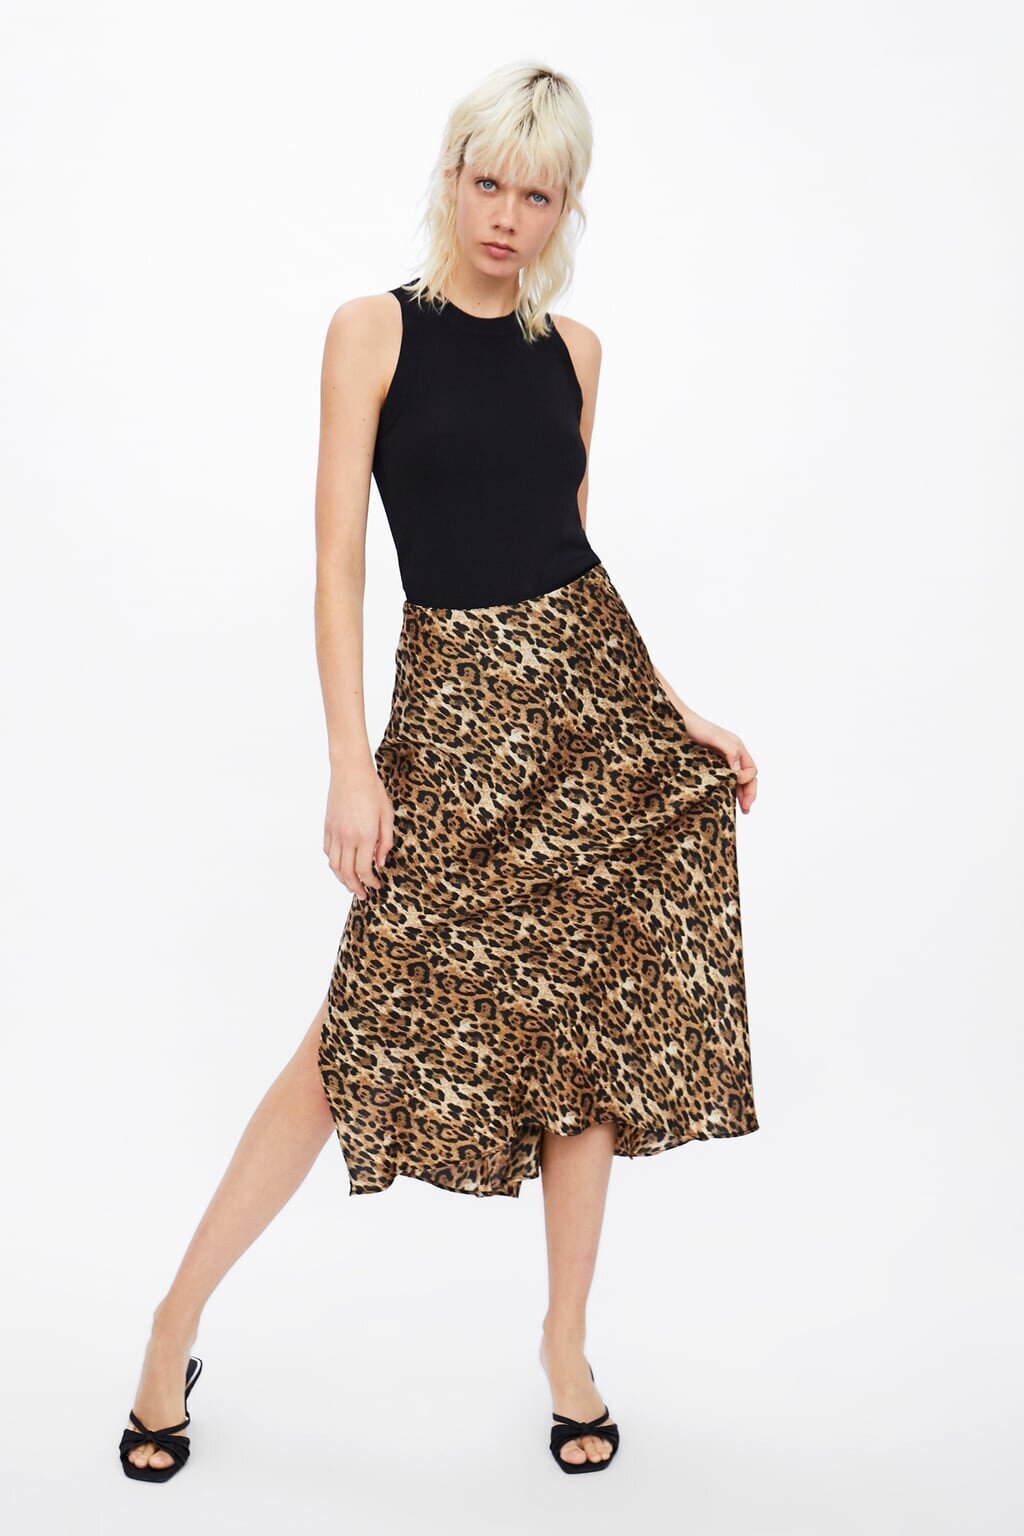 The Leopard-Print Skirt That's 